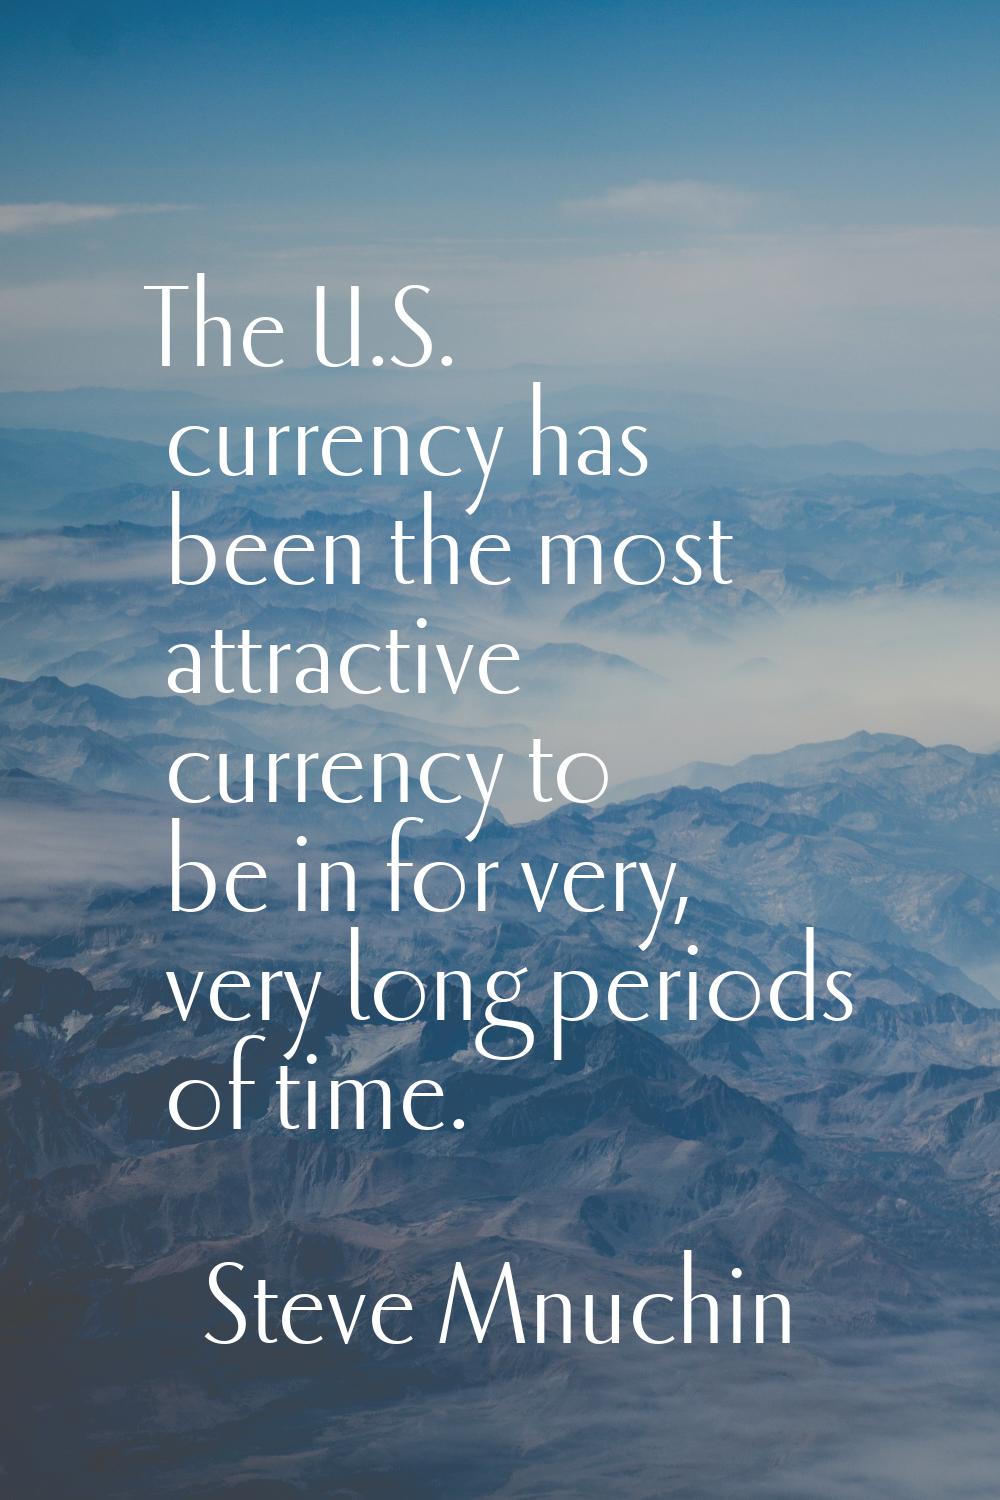 The U.S. currency has been the most attractive currency to be in for very, very long periods of tim